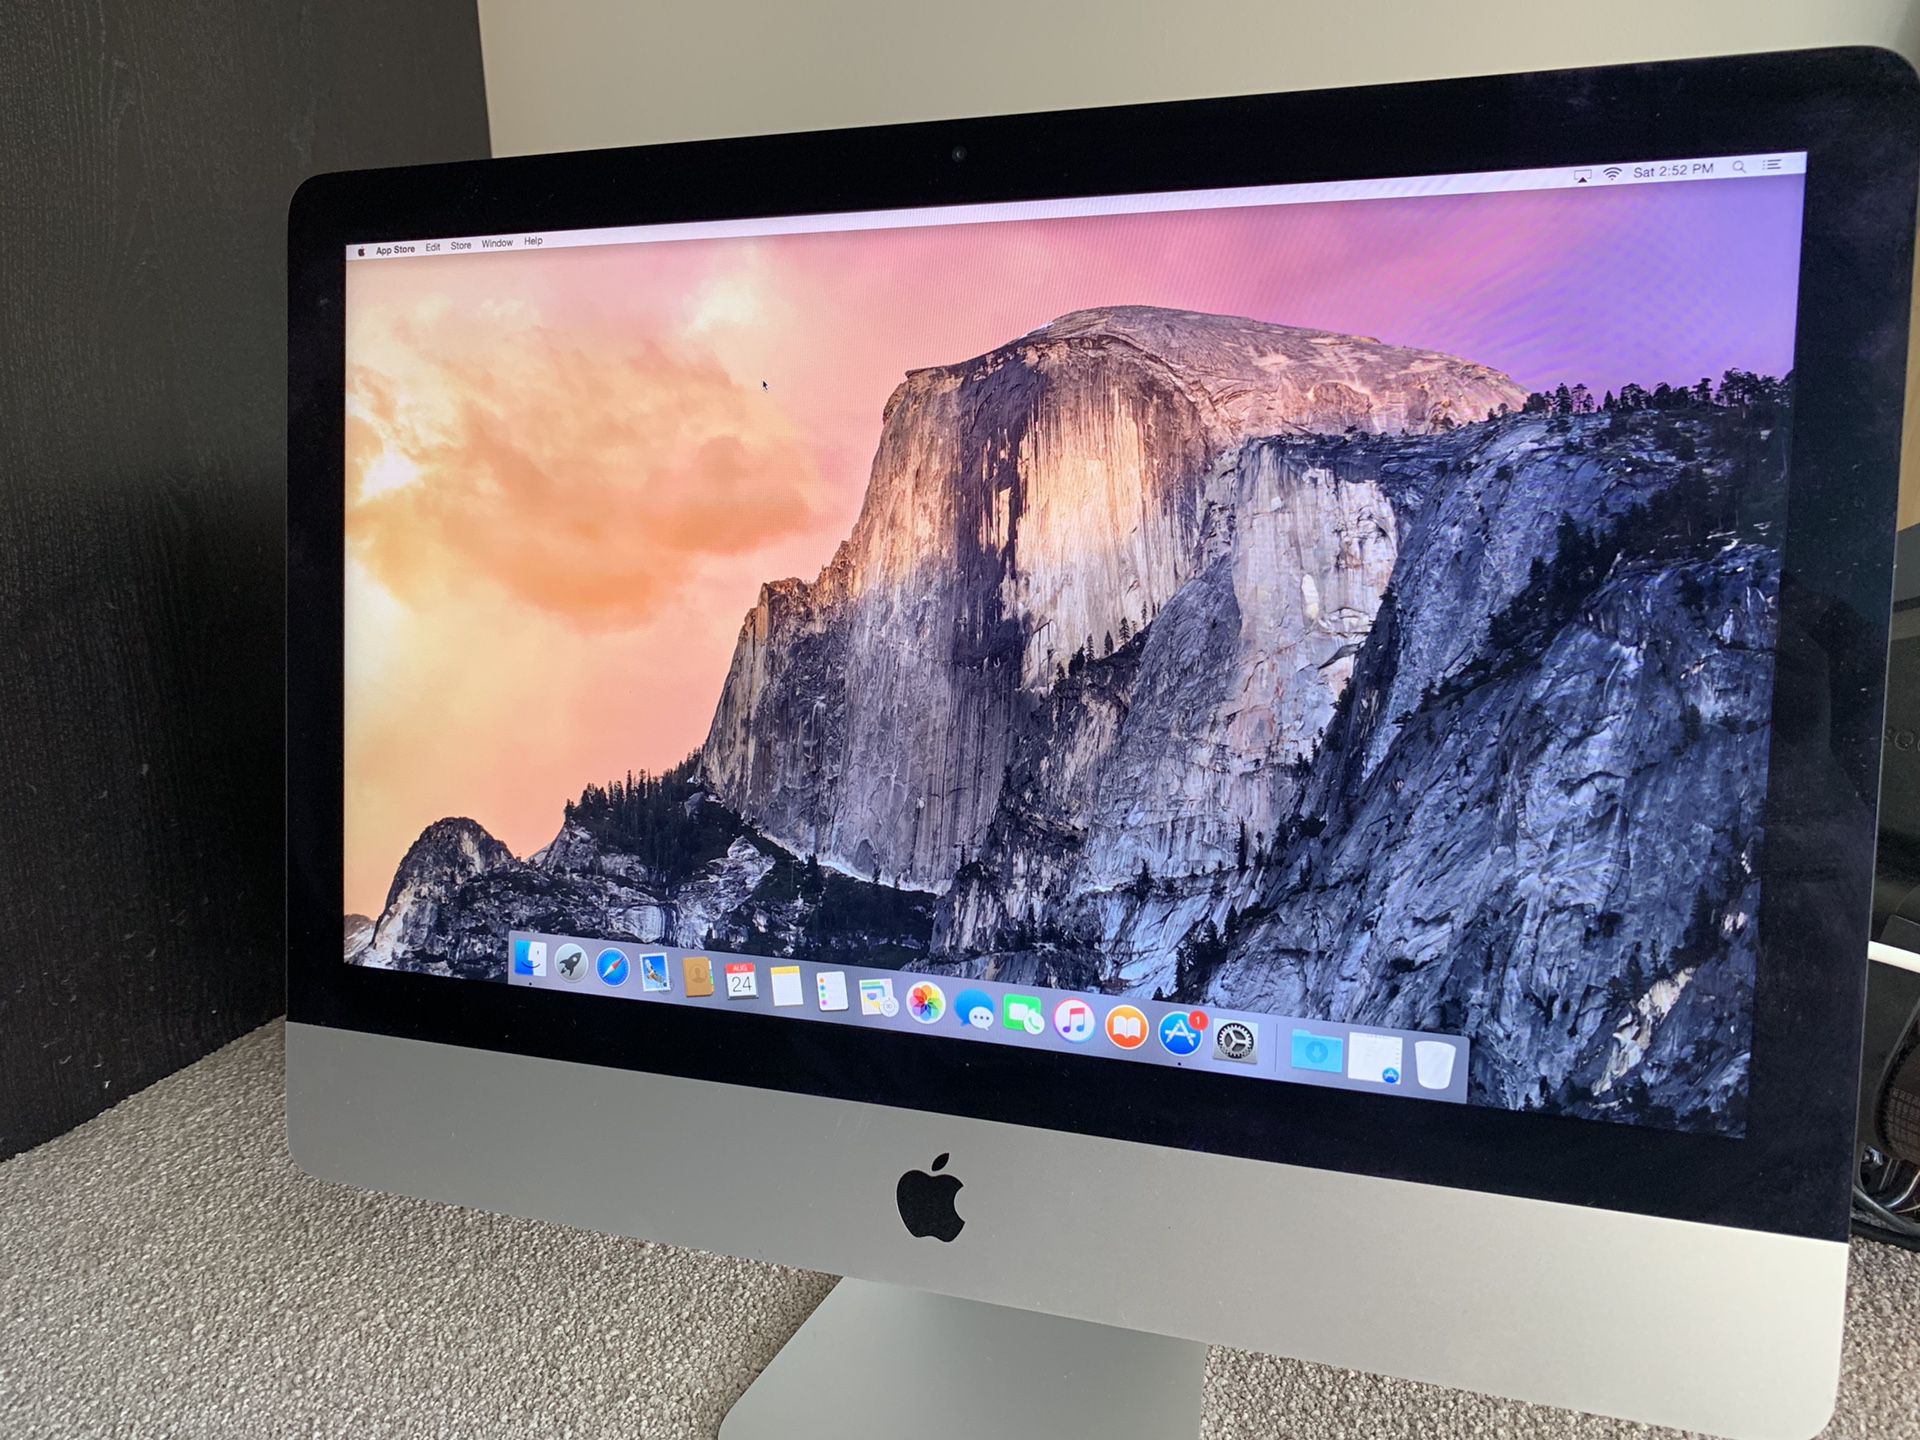 iMac 21.5-inch with wireless keyboard and mouse